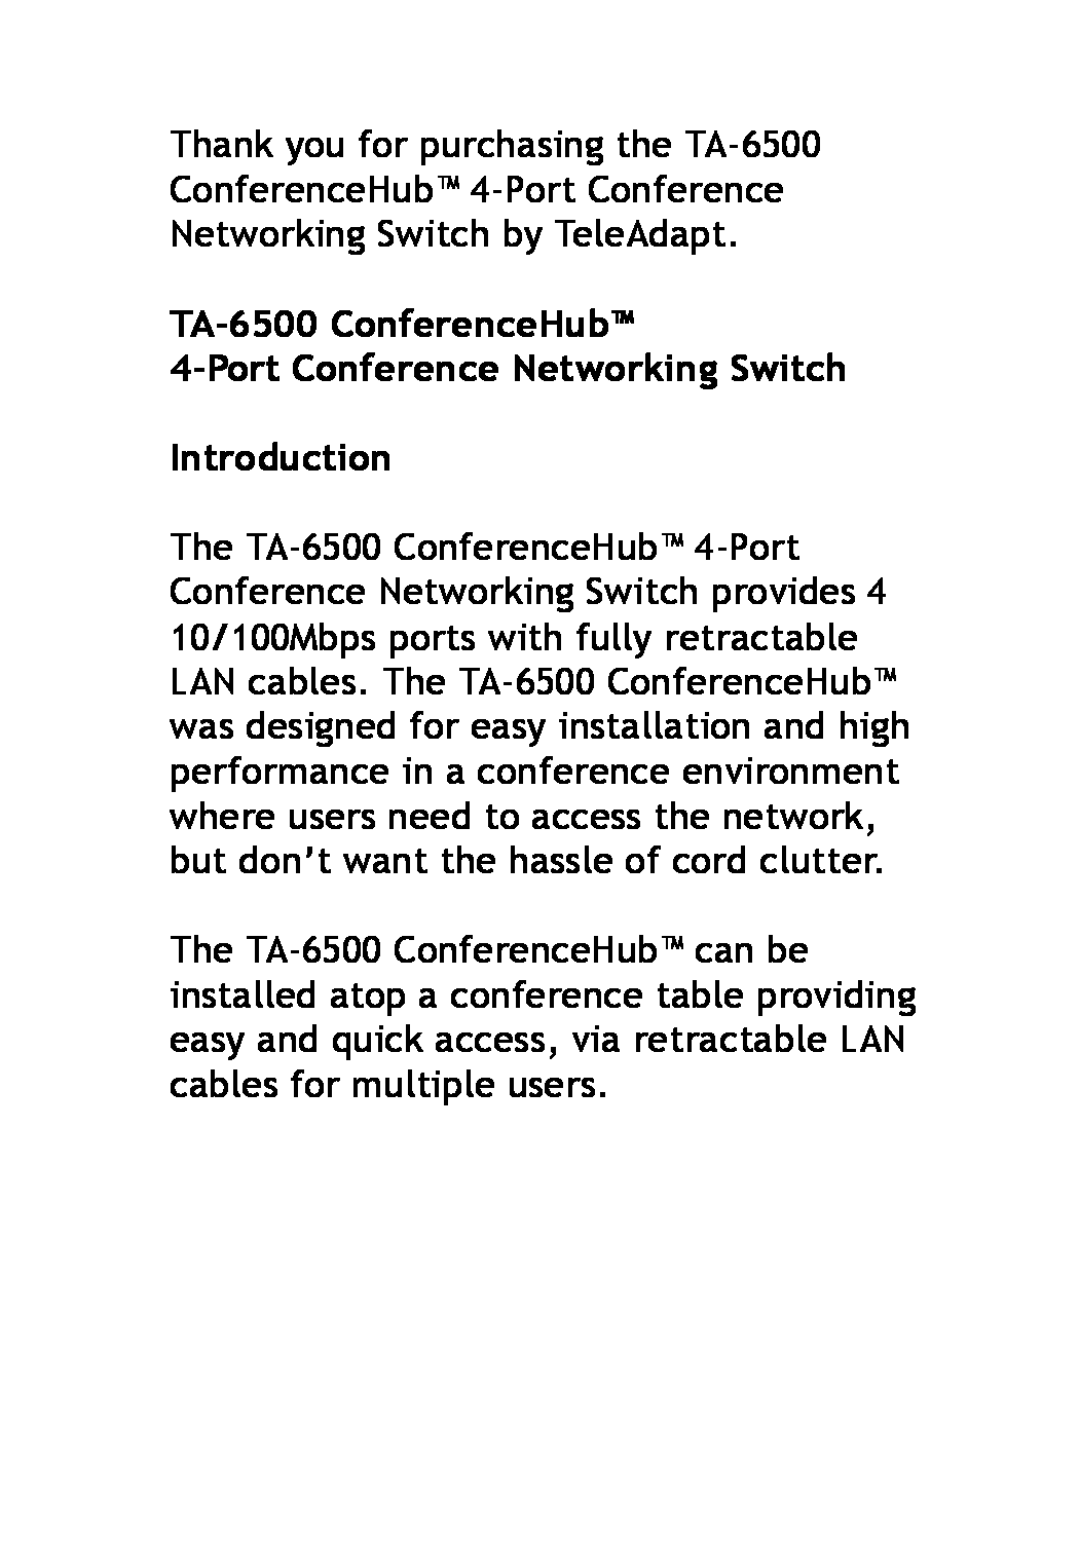 TeleAdapt user manual TA-6500 ConferenceHub 4-Port Conference Networking Switch, Introduction 